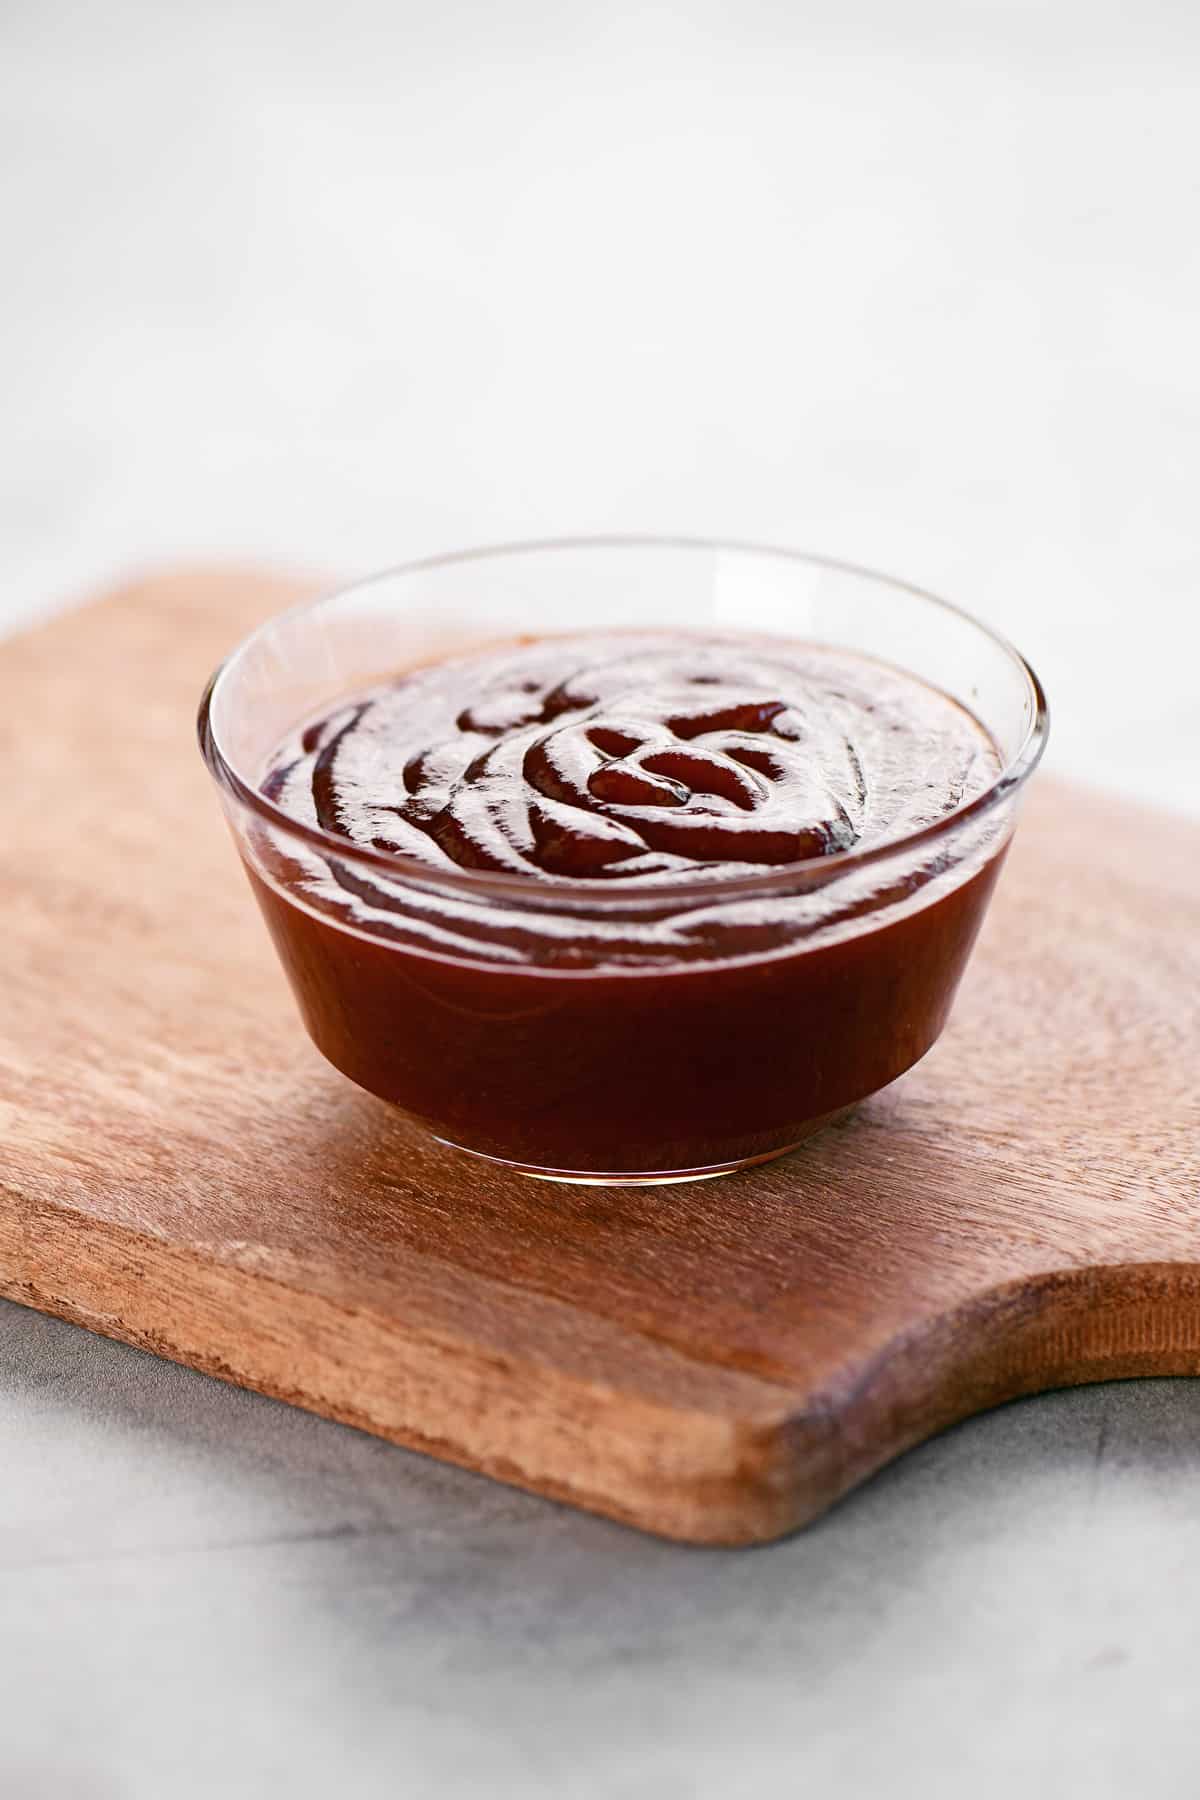 Barbeque sauce in a plastic dipping bowl.